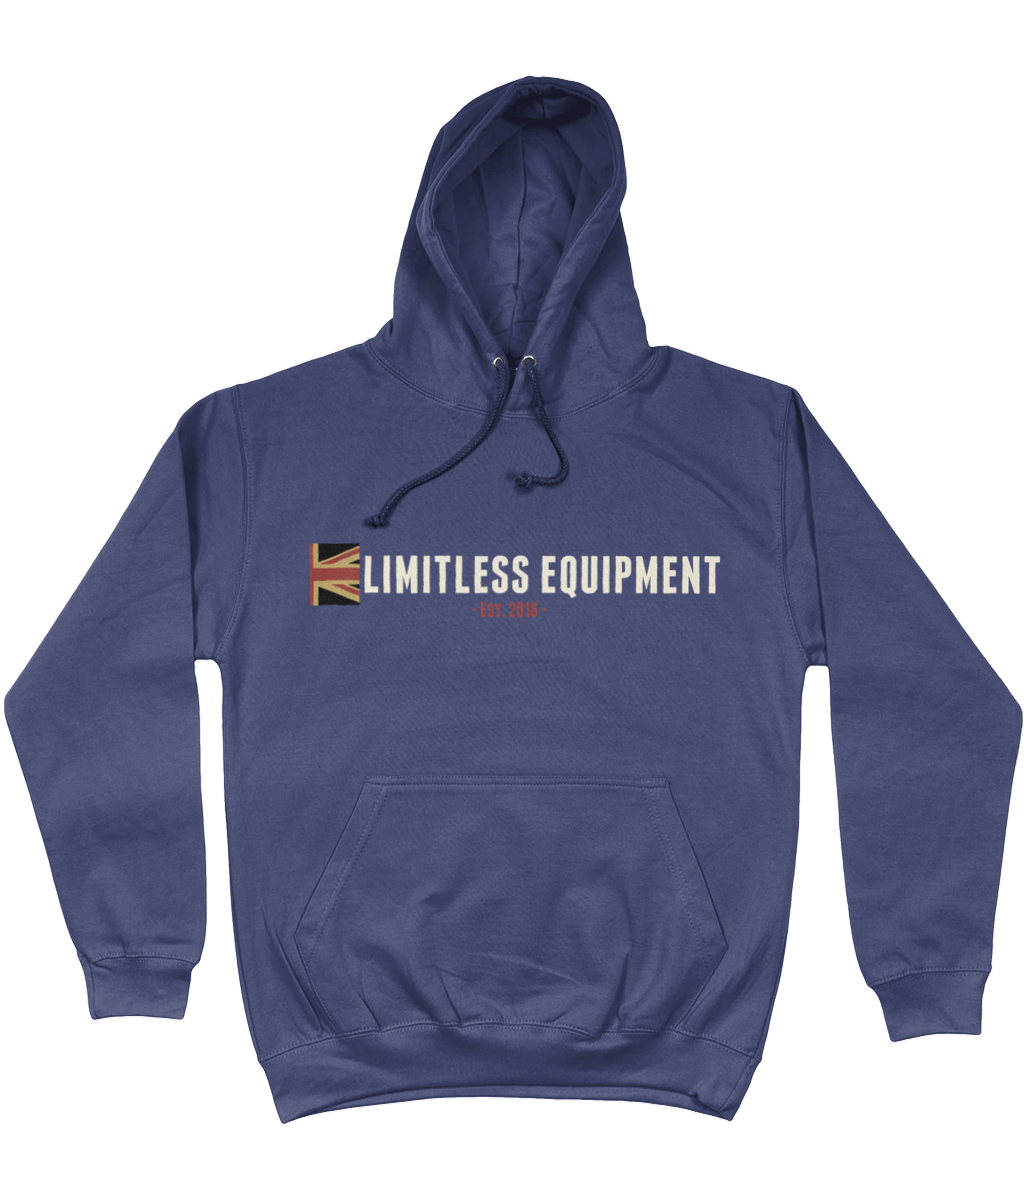 2023 Limitless "Savage the body" hoody - Limitless Equipment